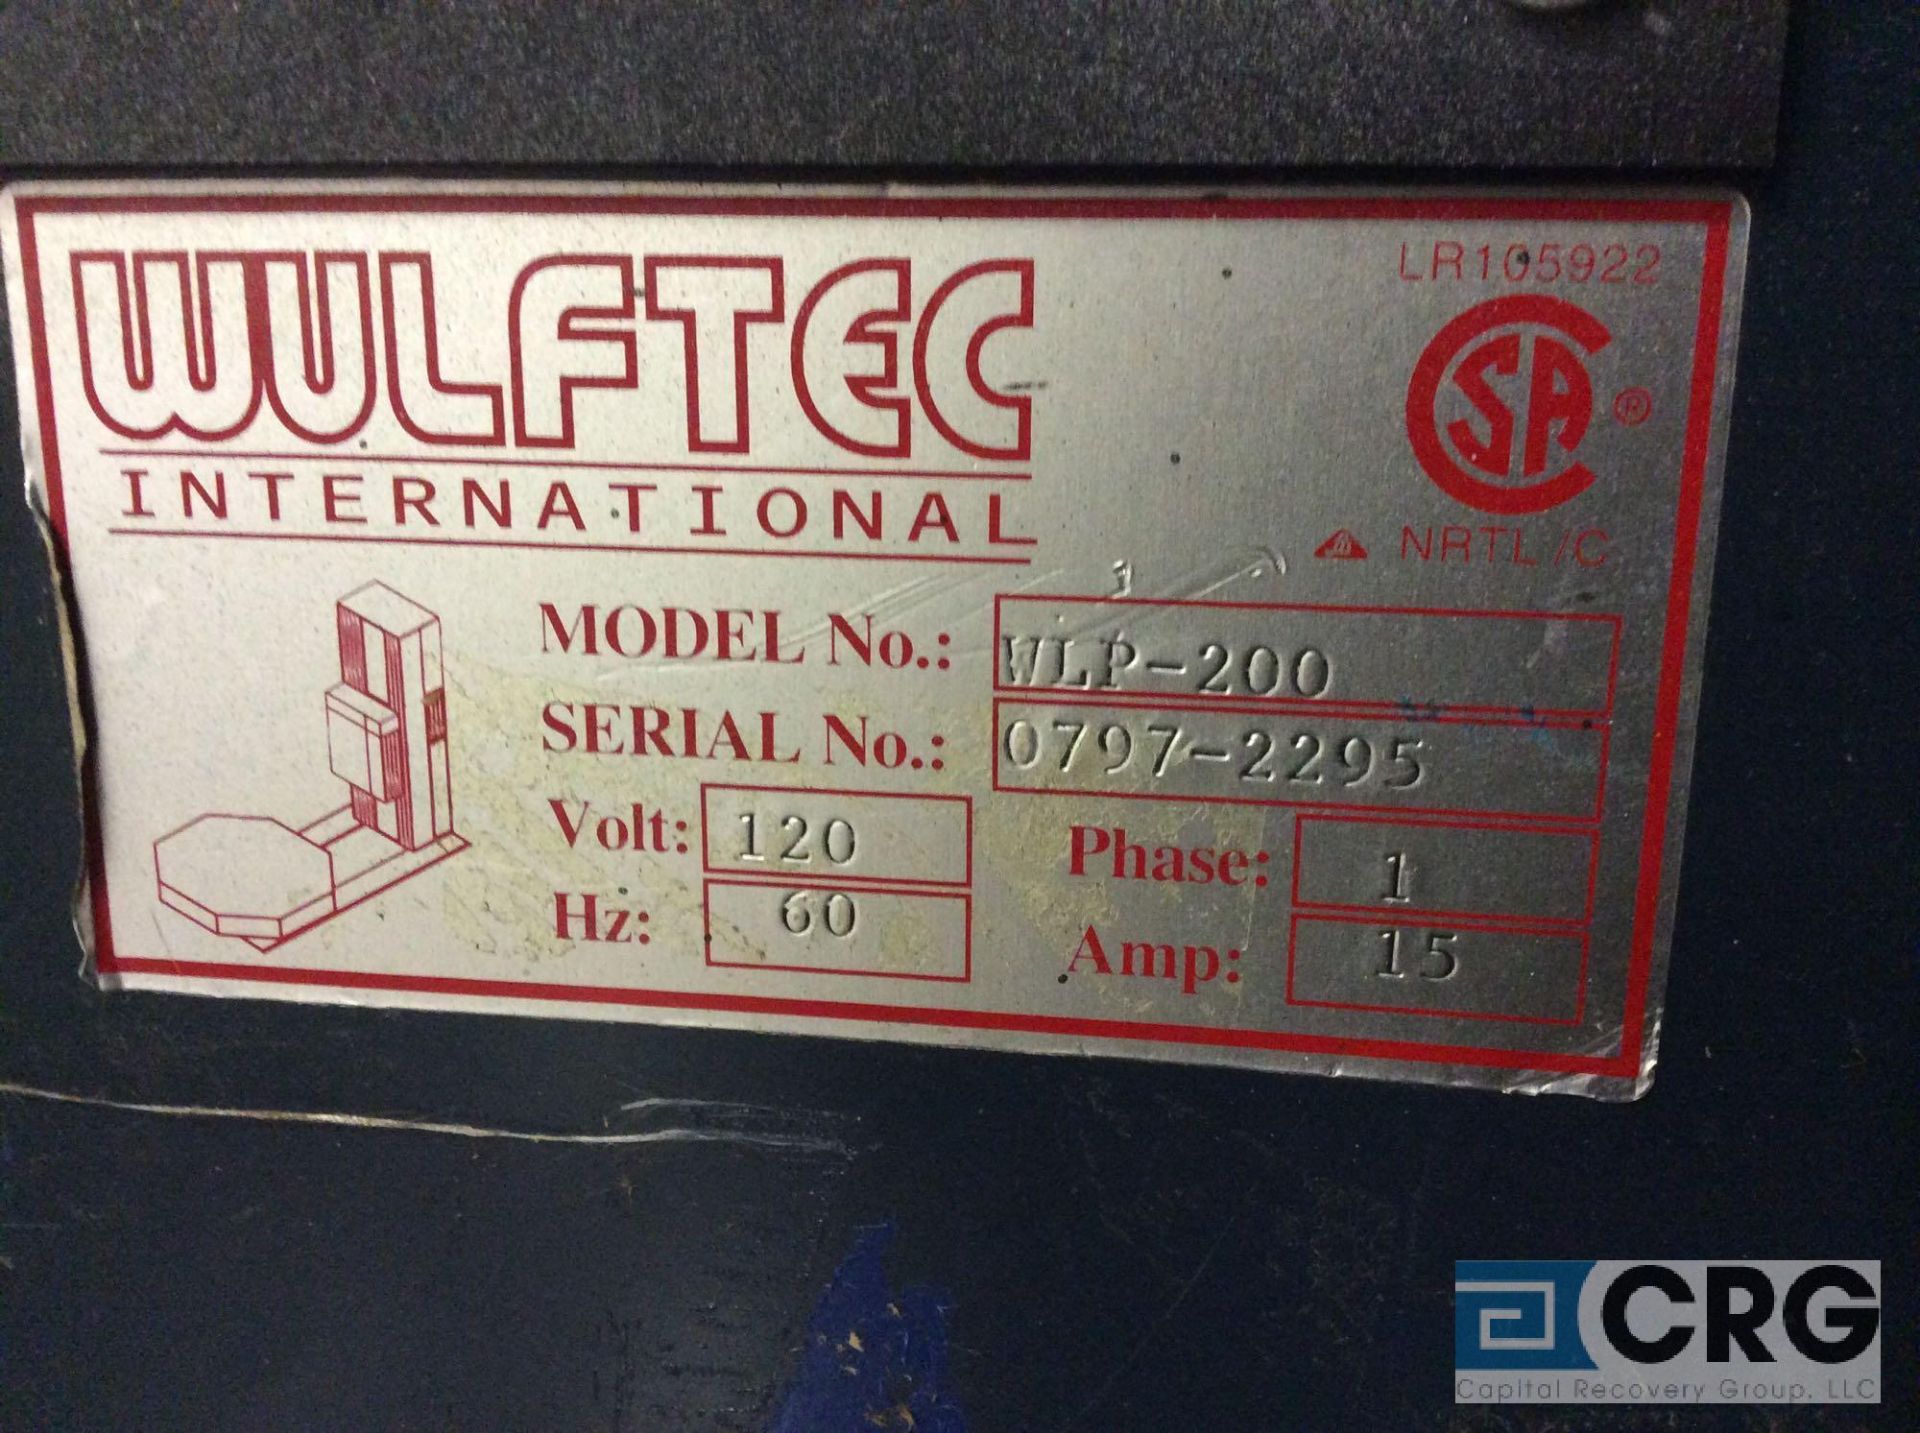 Wulftec WLP-200 International pallet wrapping machine, 1 phase - Image 3 of 3